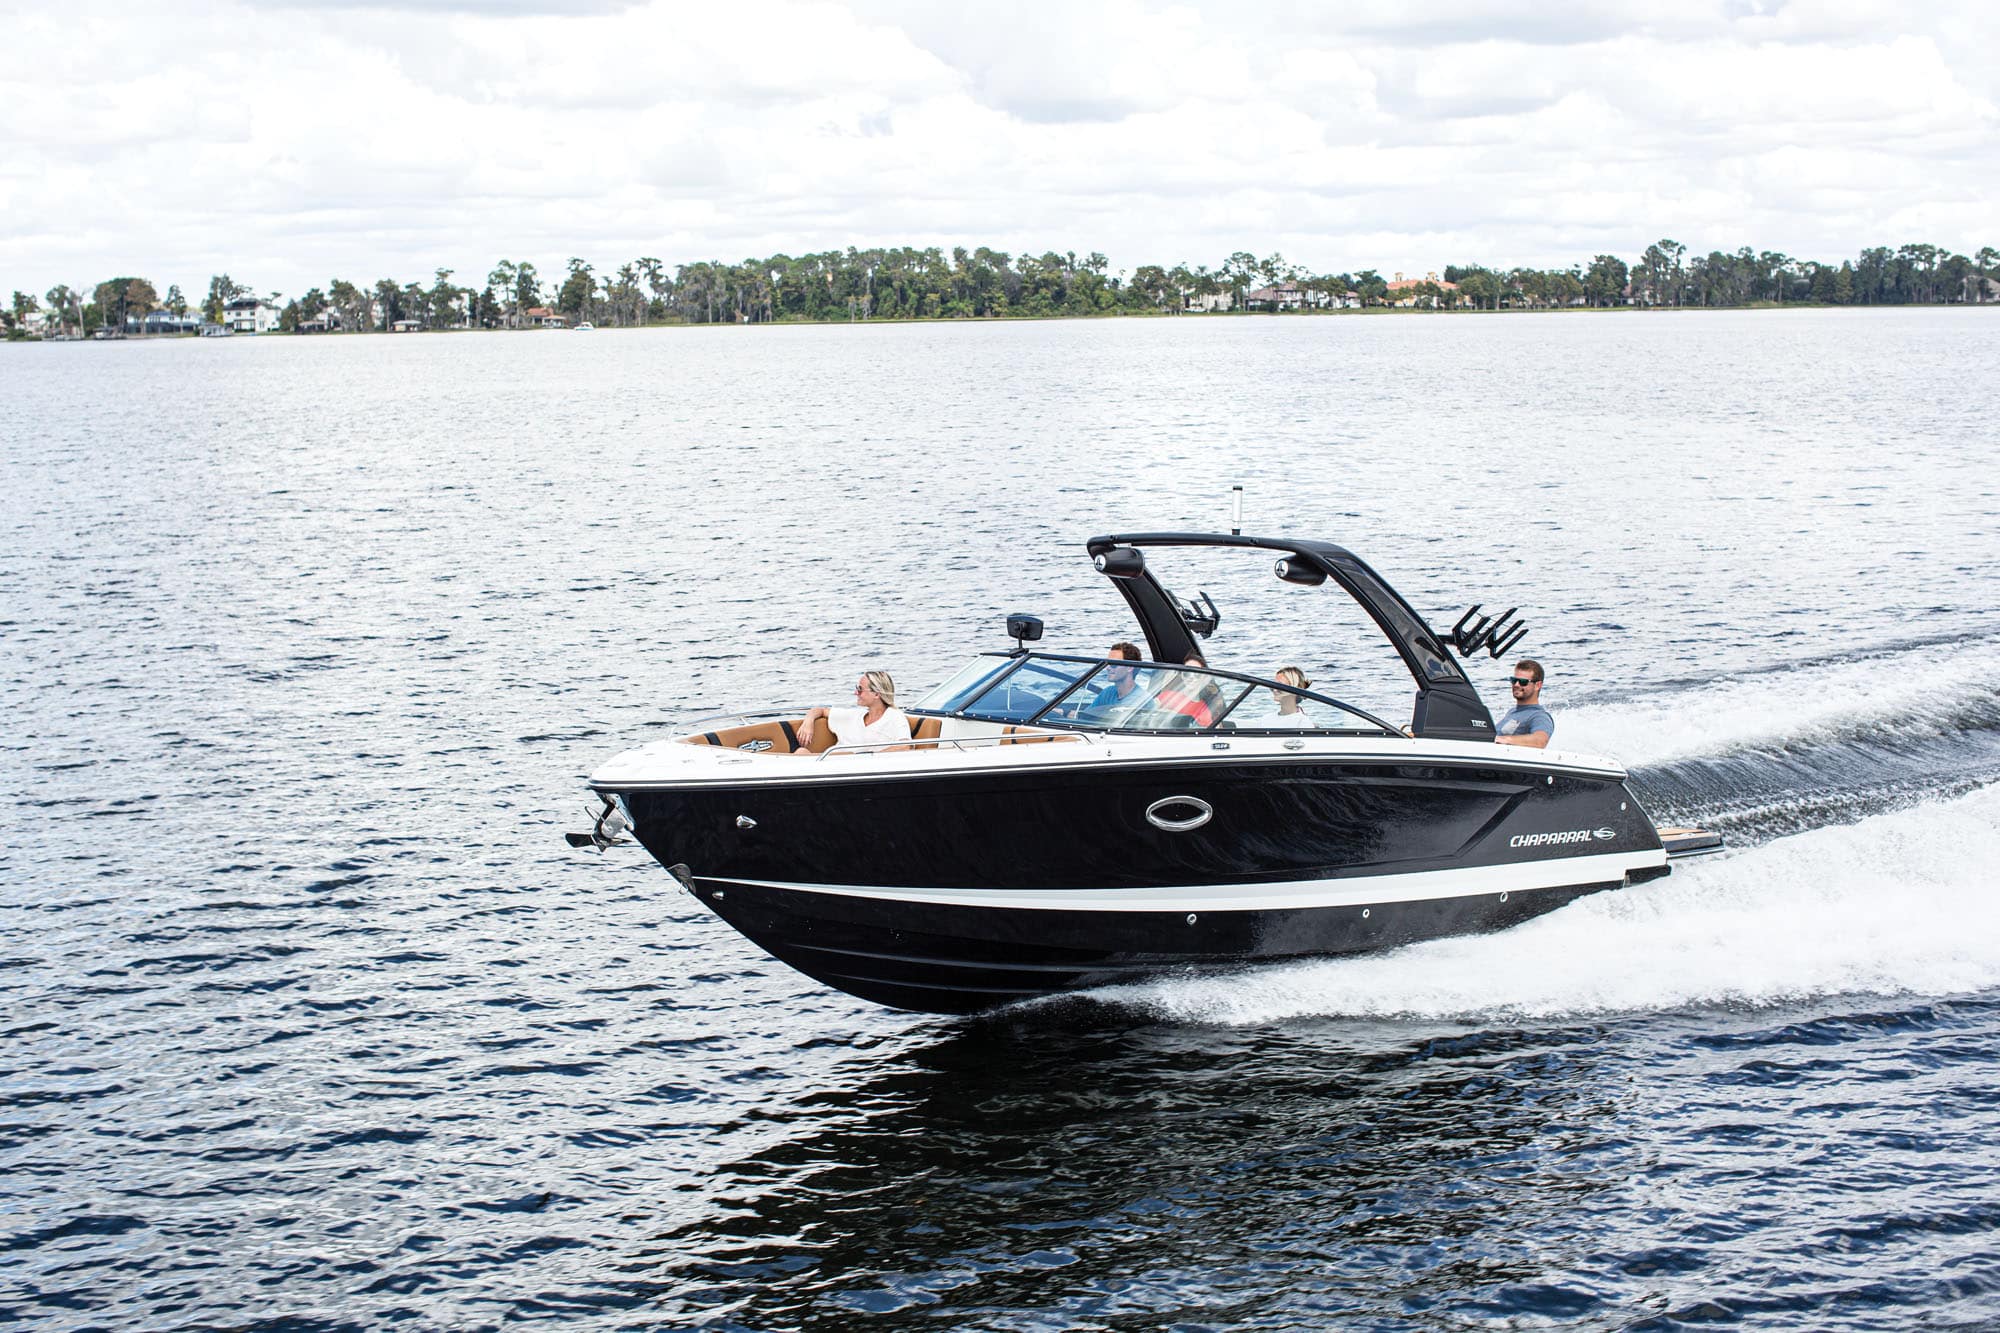 2022 Chaparral 28 Surf Boat Test, Pricing, Specs